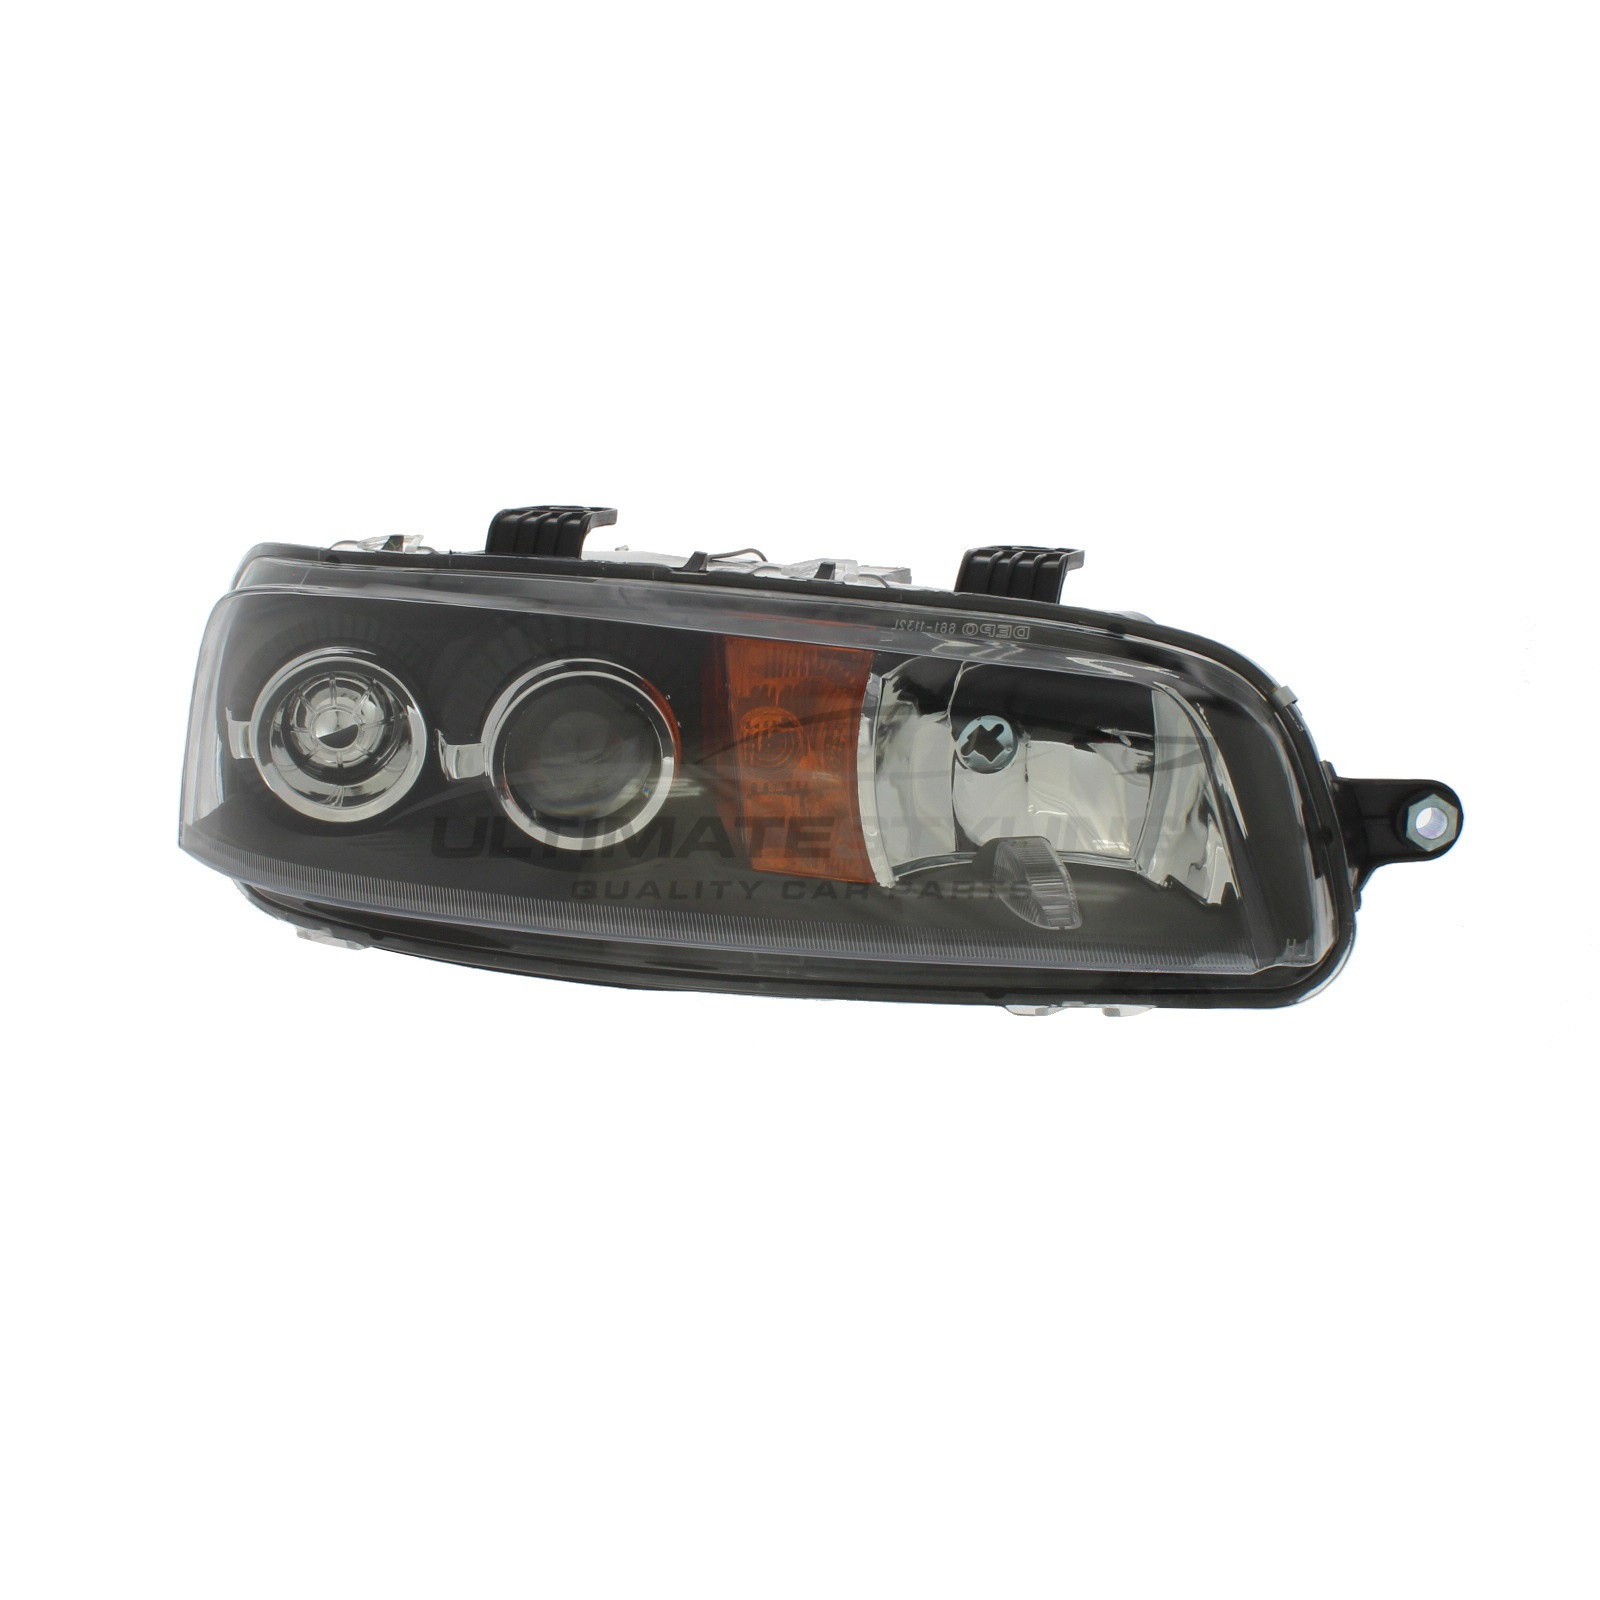 Fiat Punto 2001-2003 Halogen, Electric Without Motor, Black Headlight / Headlamp (Excludes Fog Lamp) Drivers Side (RH)